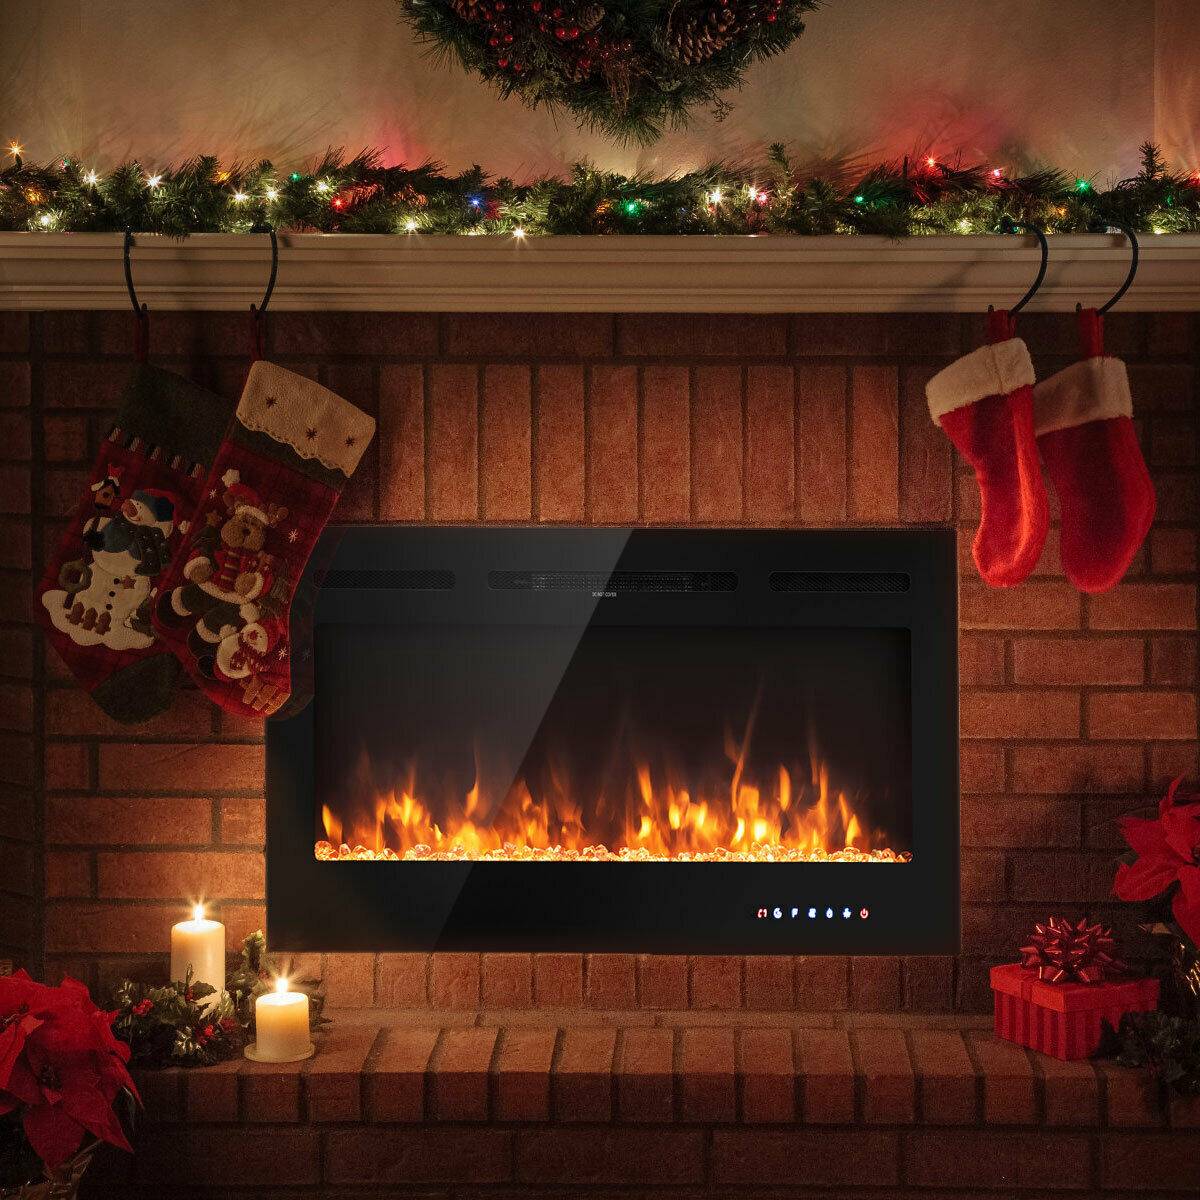 40'' Electric Fireplace Recessed And Wall Mounted 750W/1500W W/ Multicolor Flame